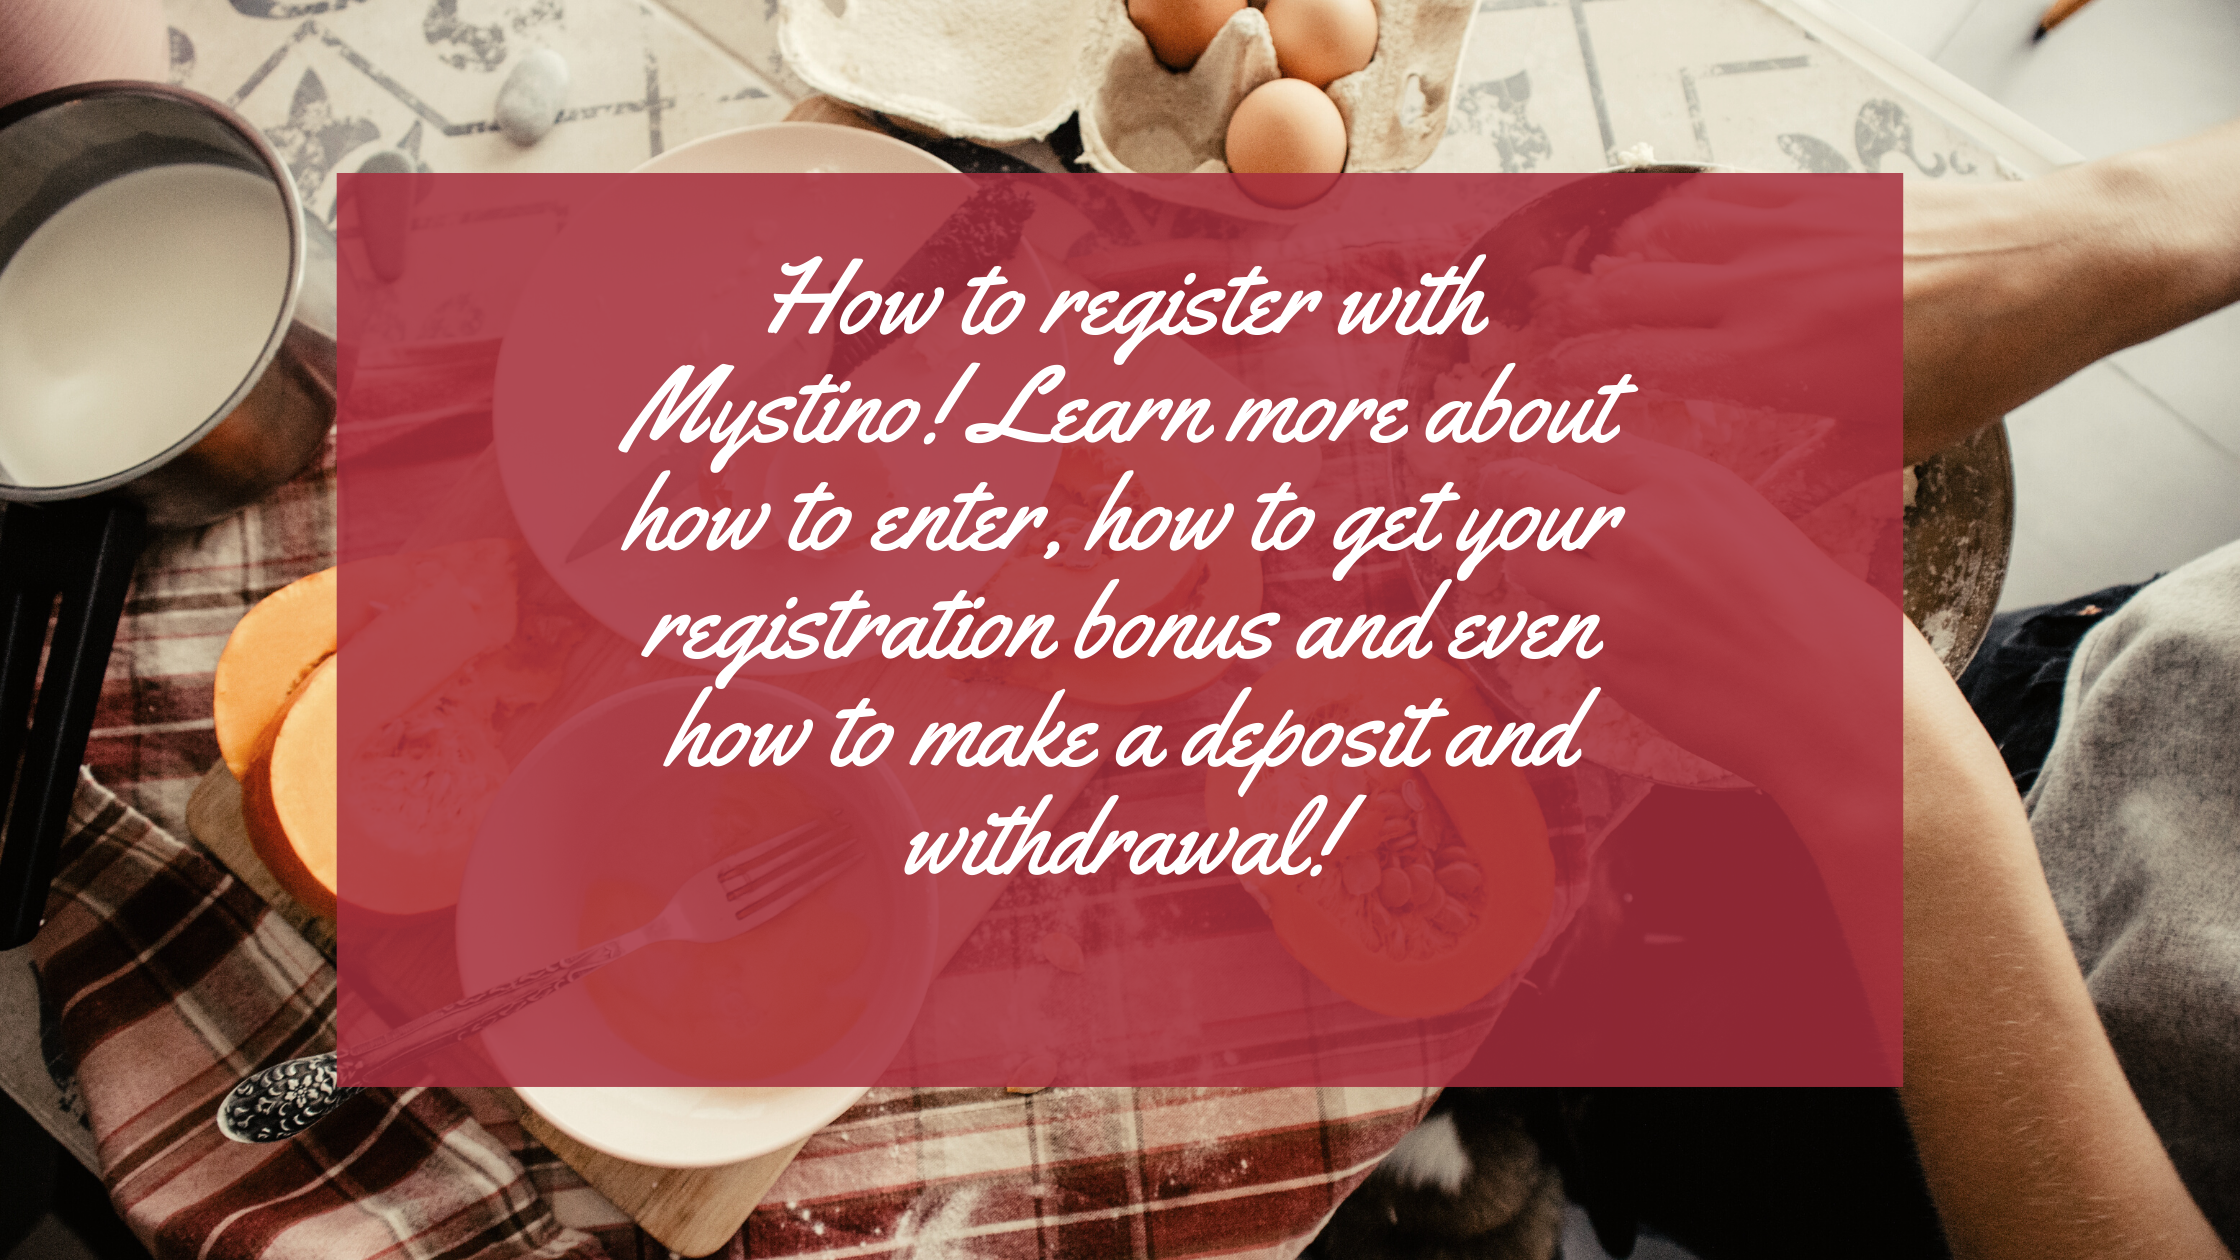 How to register with Mystino! Learn more about how to enter, how to get your registration bonus and even how to make a deposit and withdrawal!